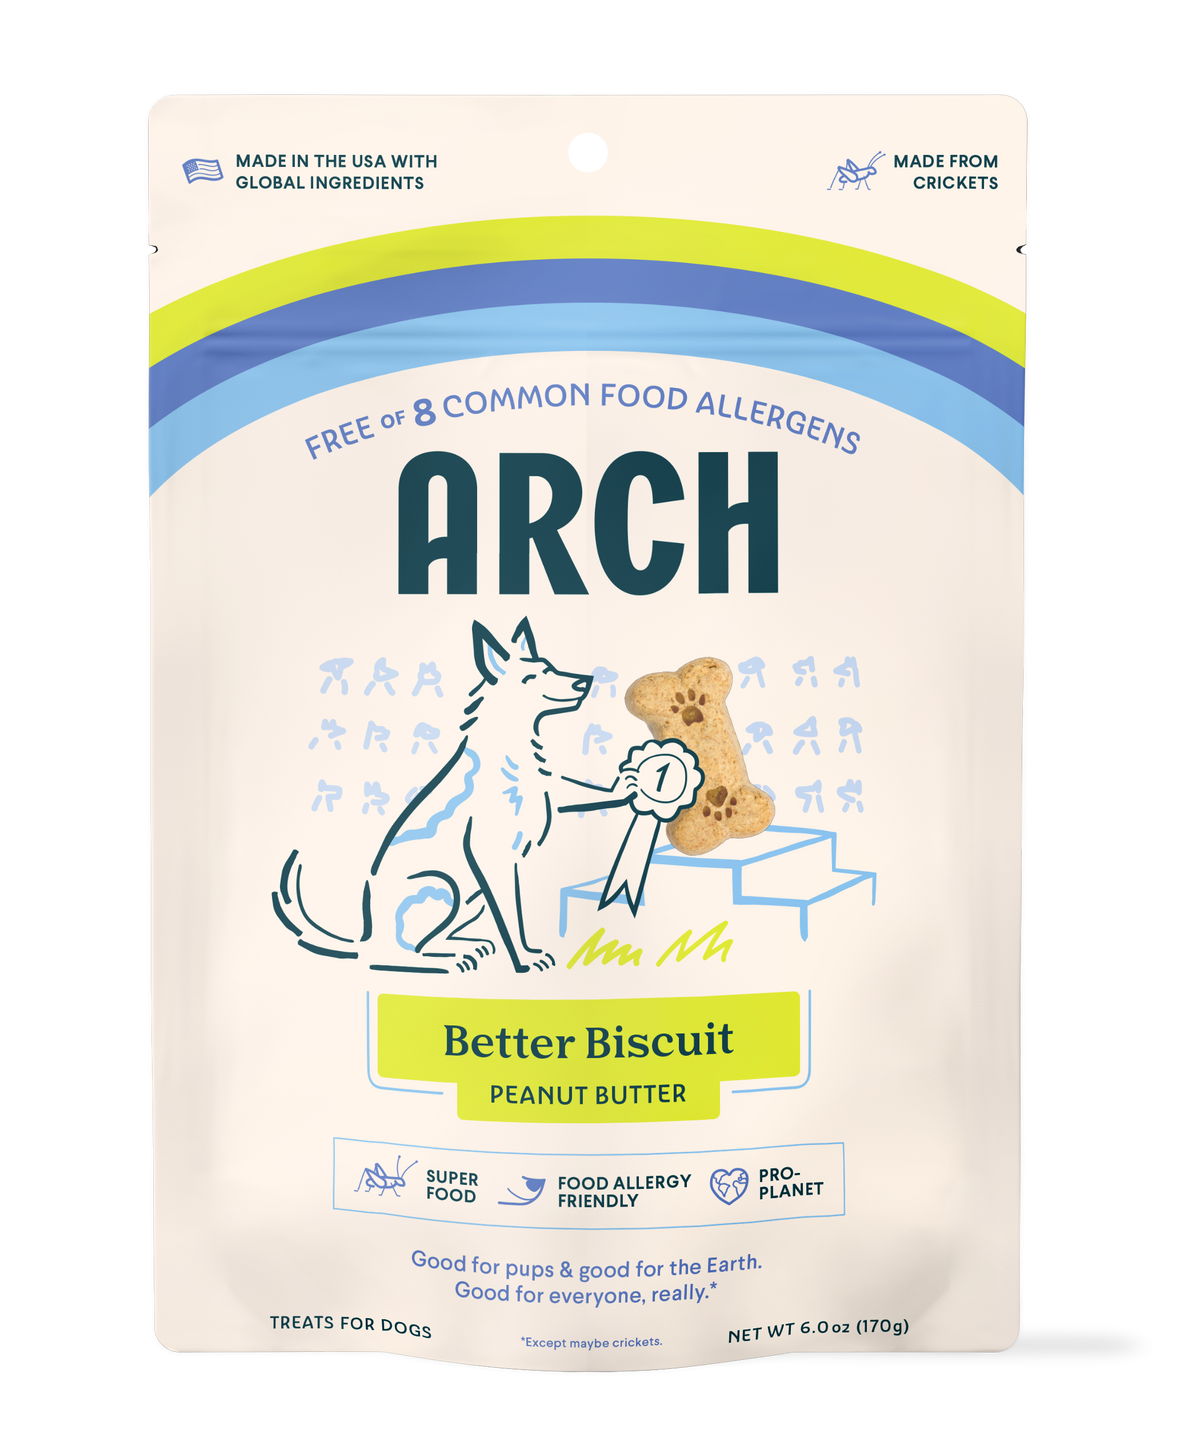 Dog hypo treats in their package from Arch Pet Food.